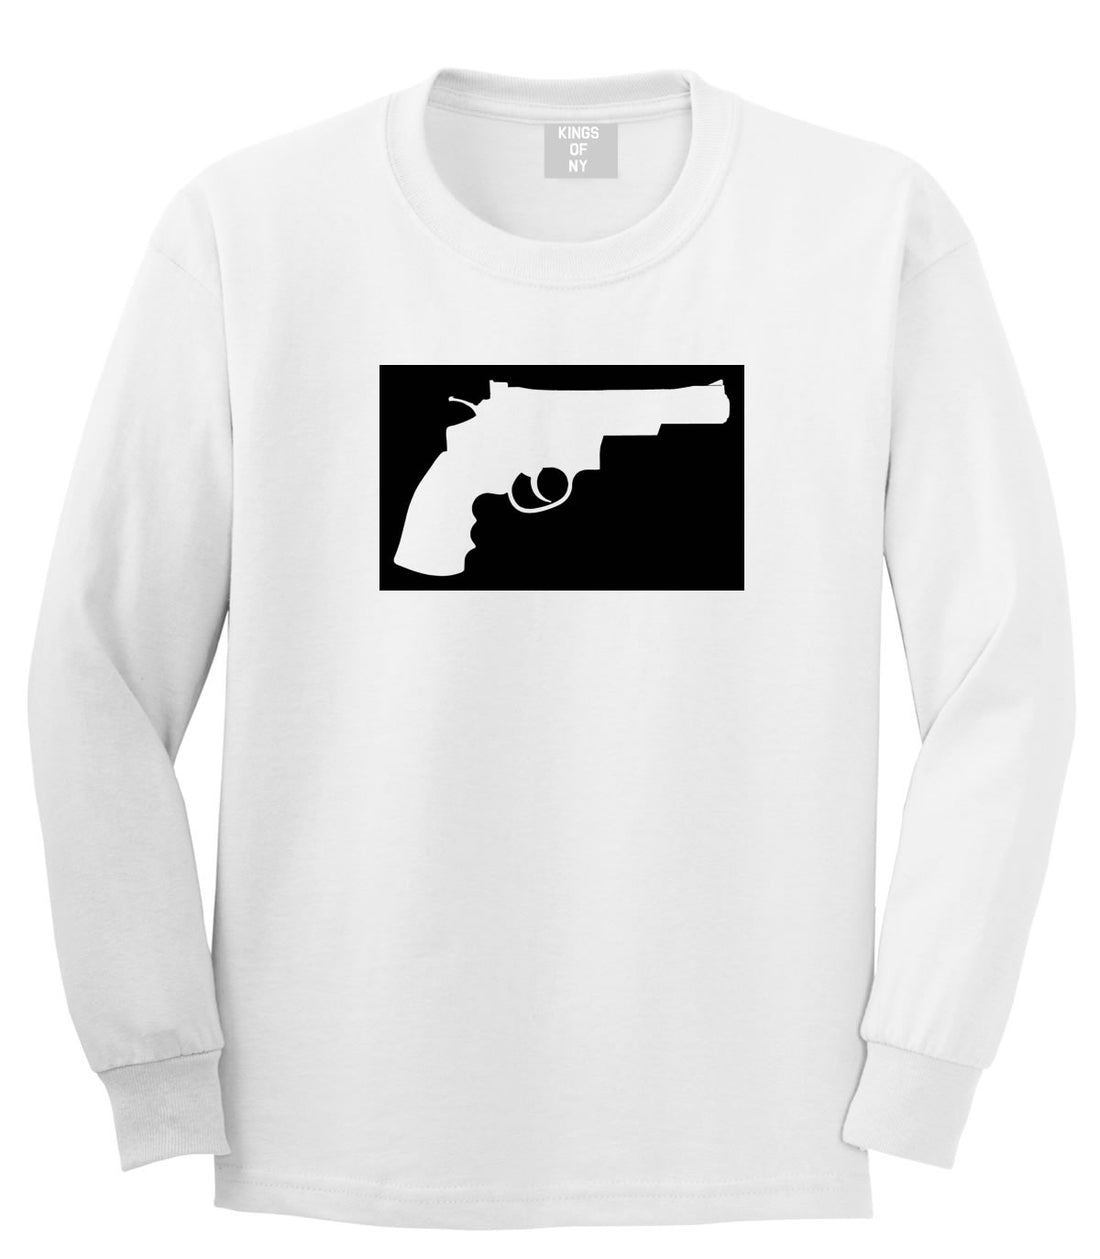 Gun Silhouette Revolver 45 Chrome Long Sleeve T-Shirt in White By Kings Of NY